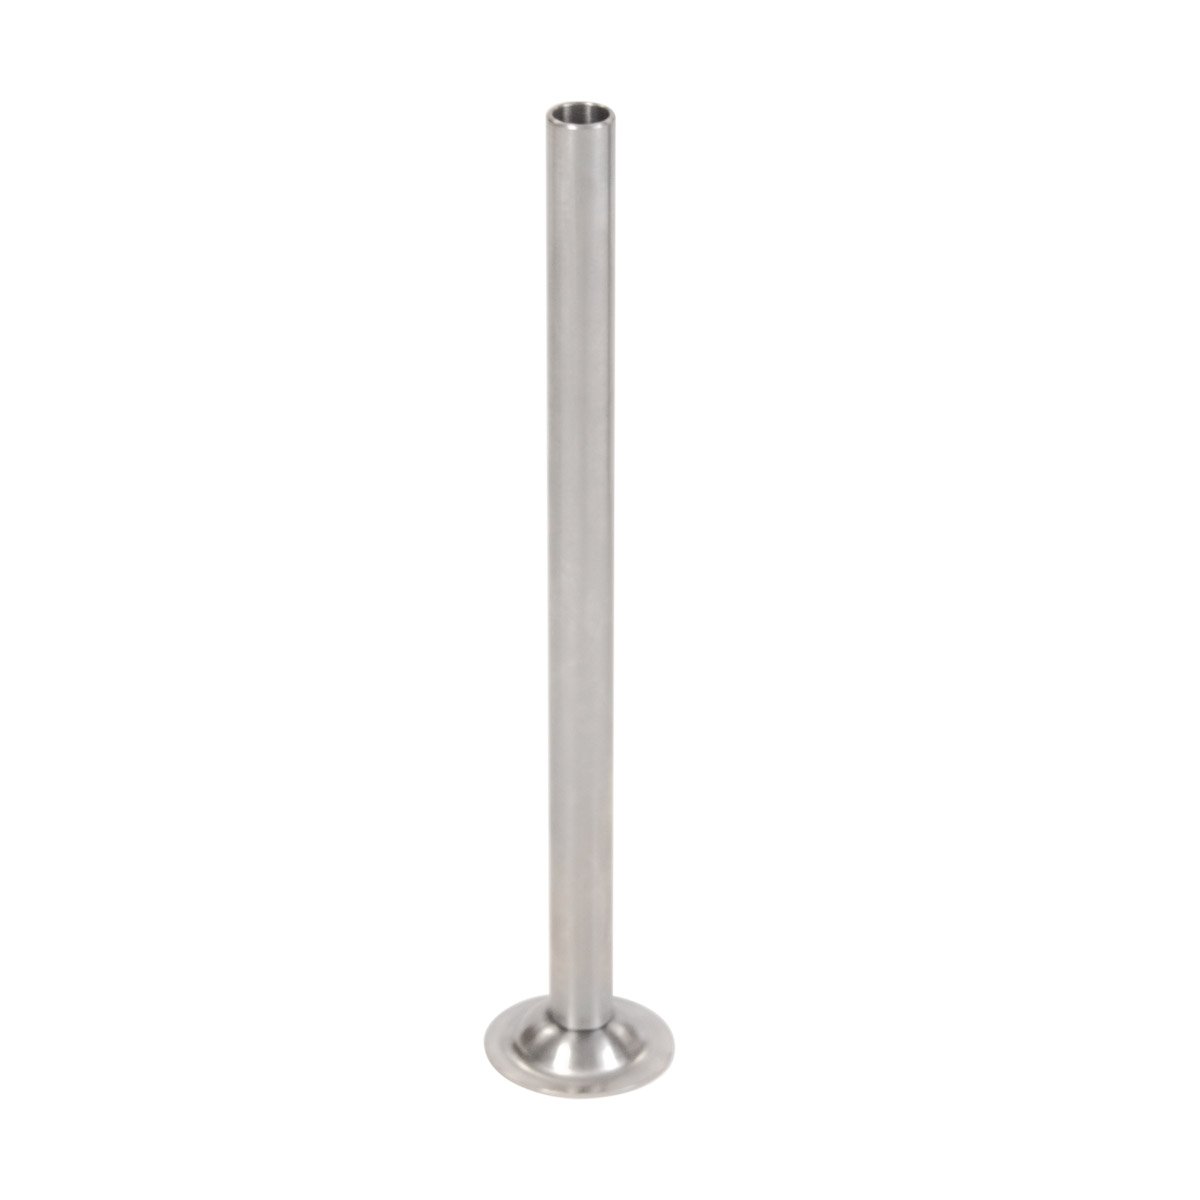 The Sausage Maker - 1/2" Diameter Stainless Steel Stuffing Tube for 5 lb Sausage Stuffer